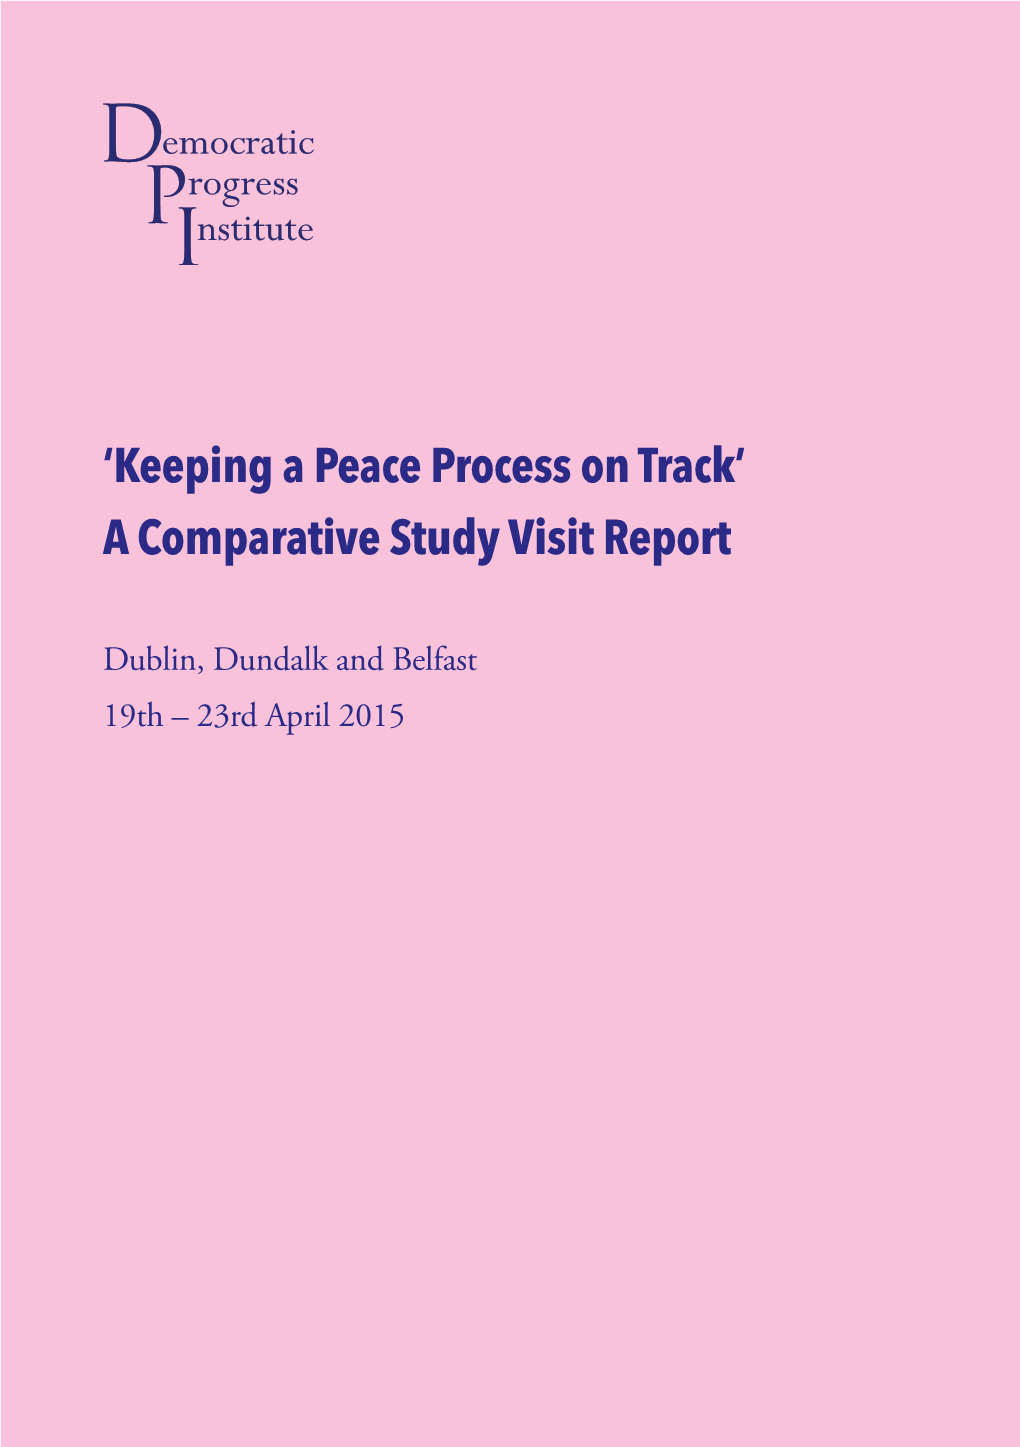 'Keeping a Peace Process on Track' a Comparative Study Visit Report